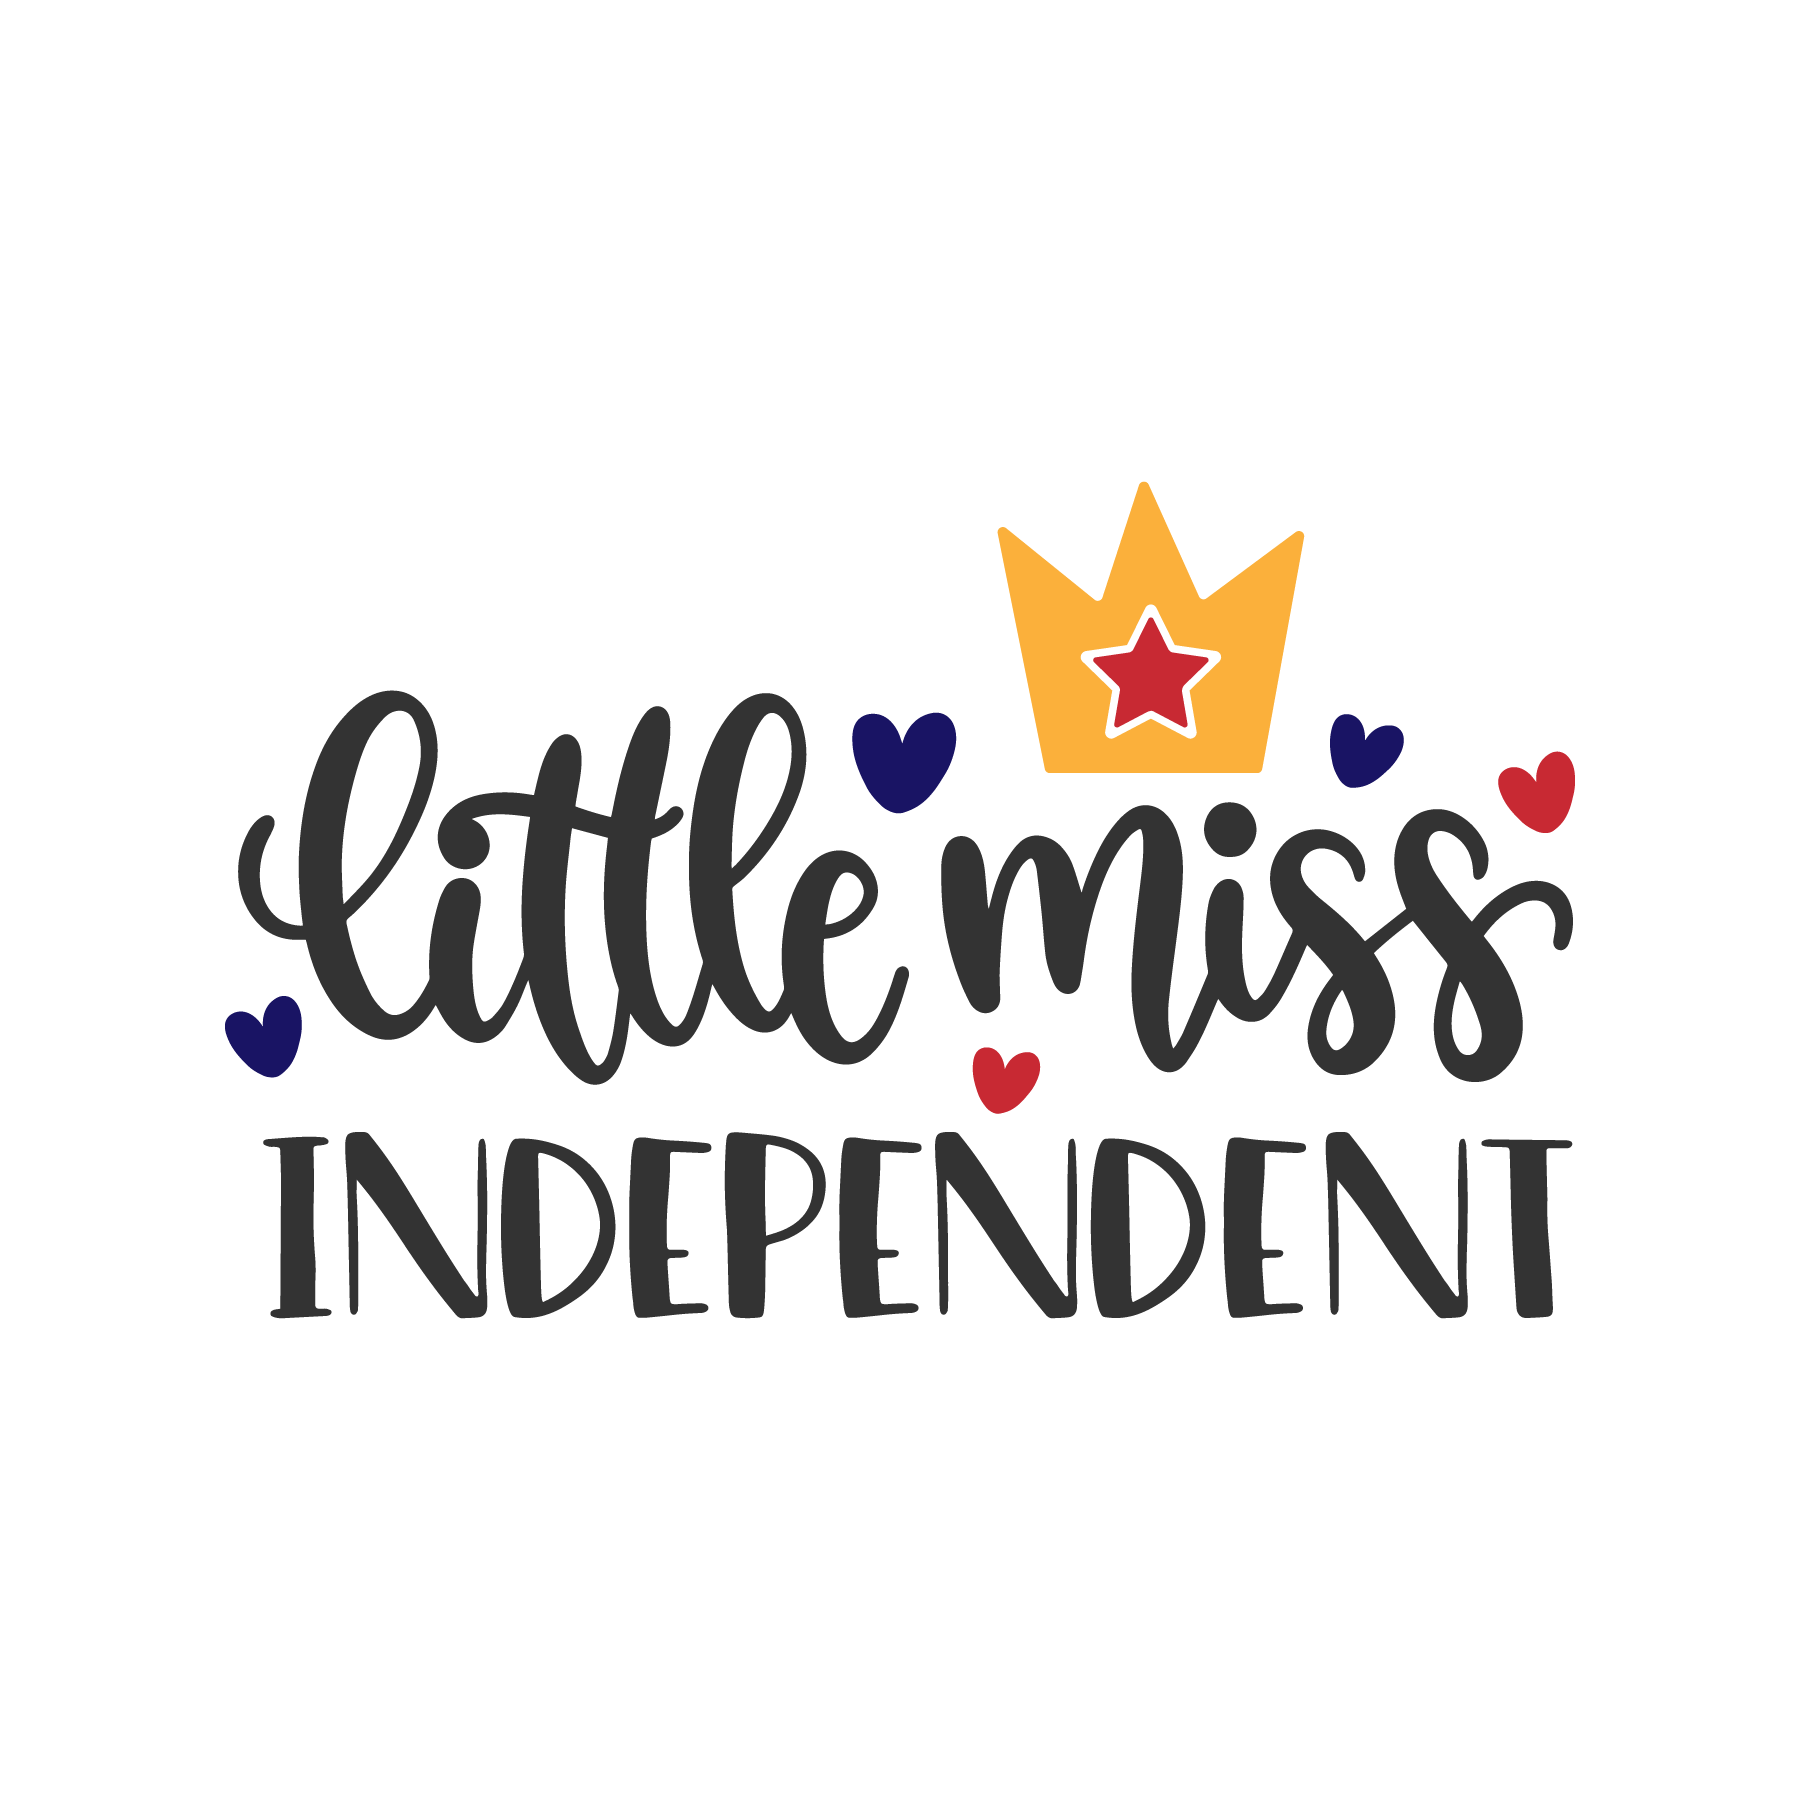 Little miss independent patriotic heat transfers